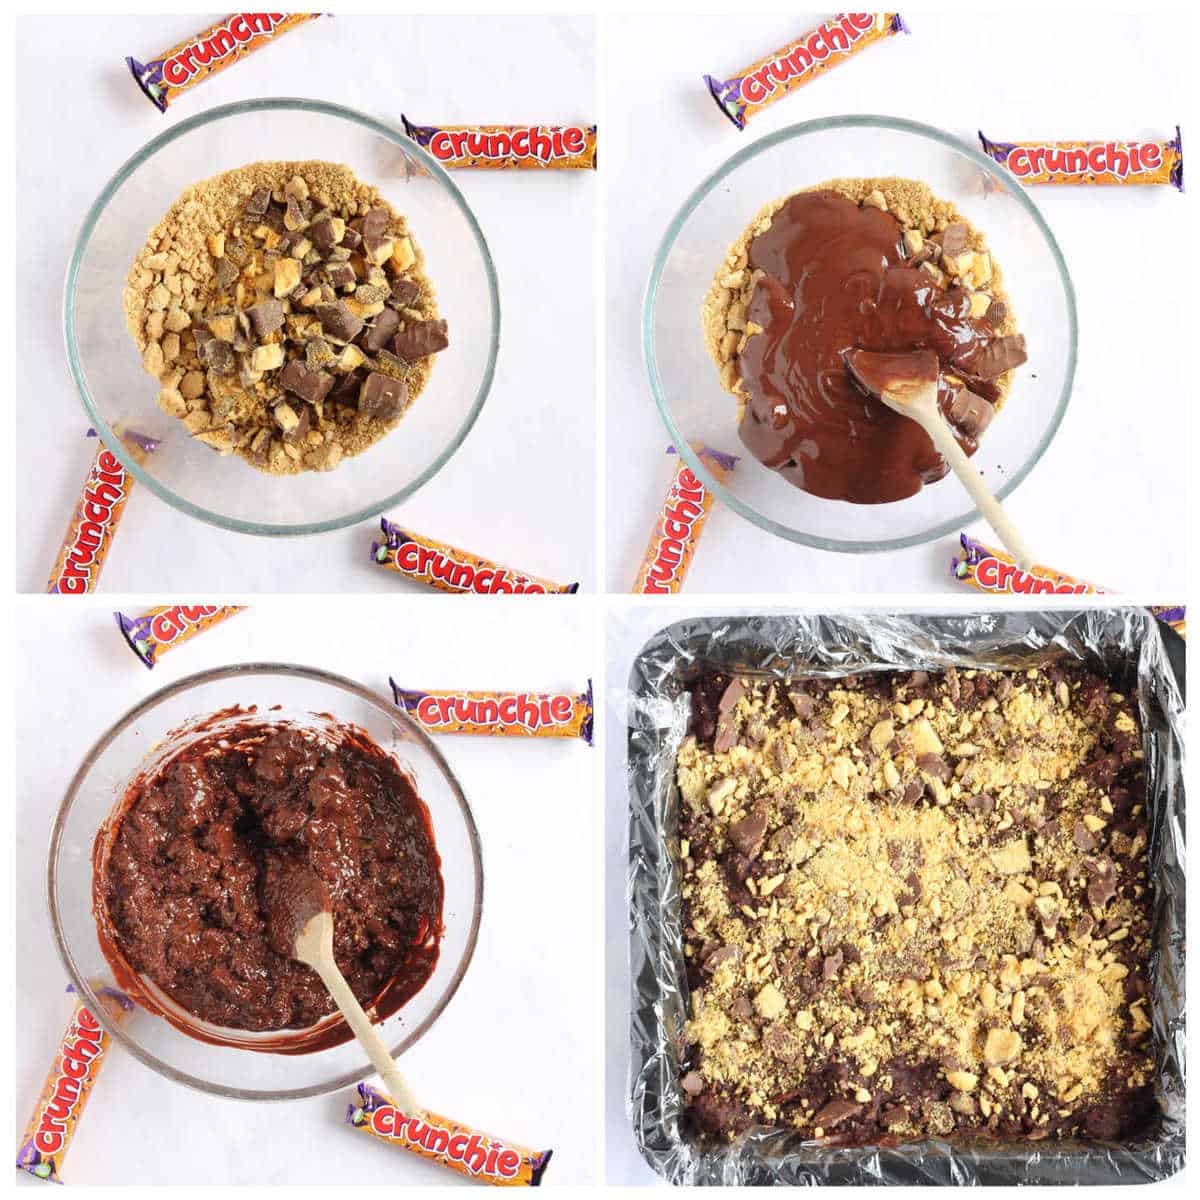 Step by step process photo's of how to make chocolate honeycomb tiffin.